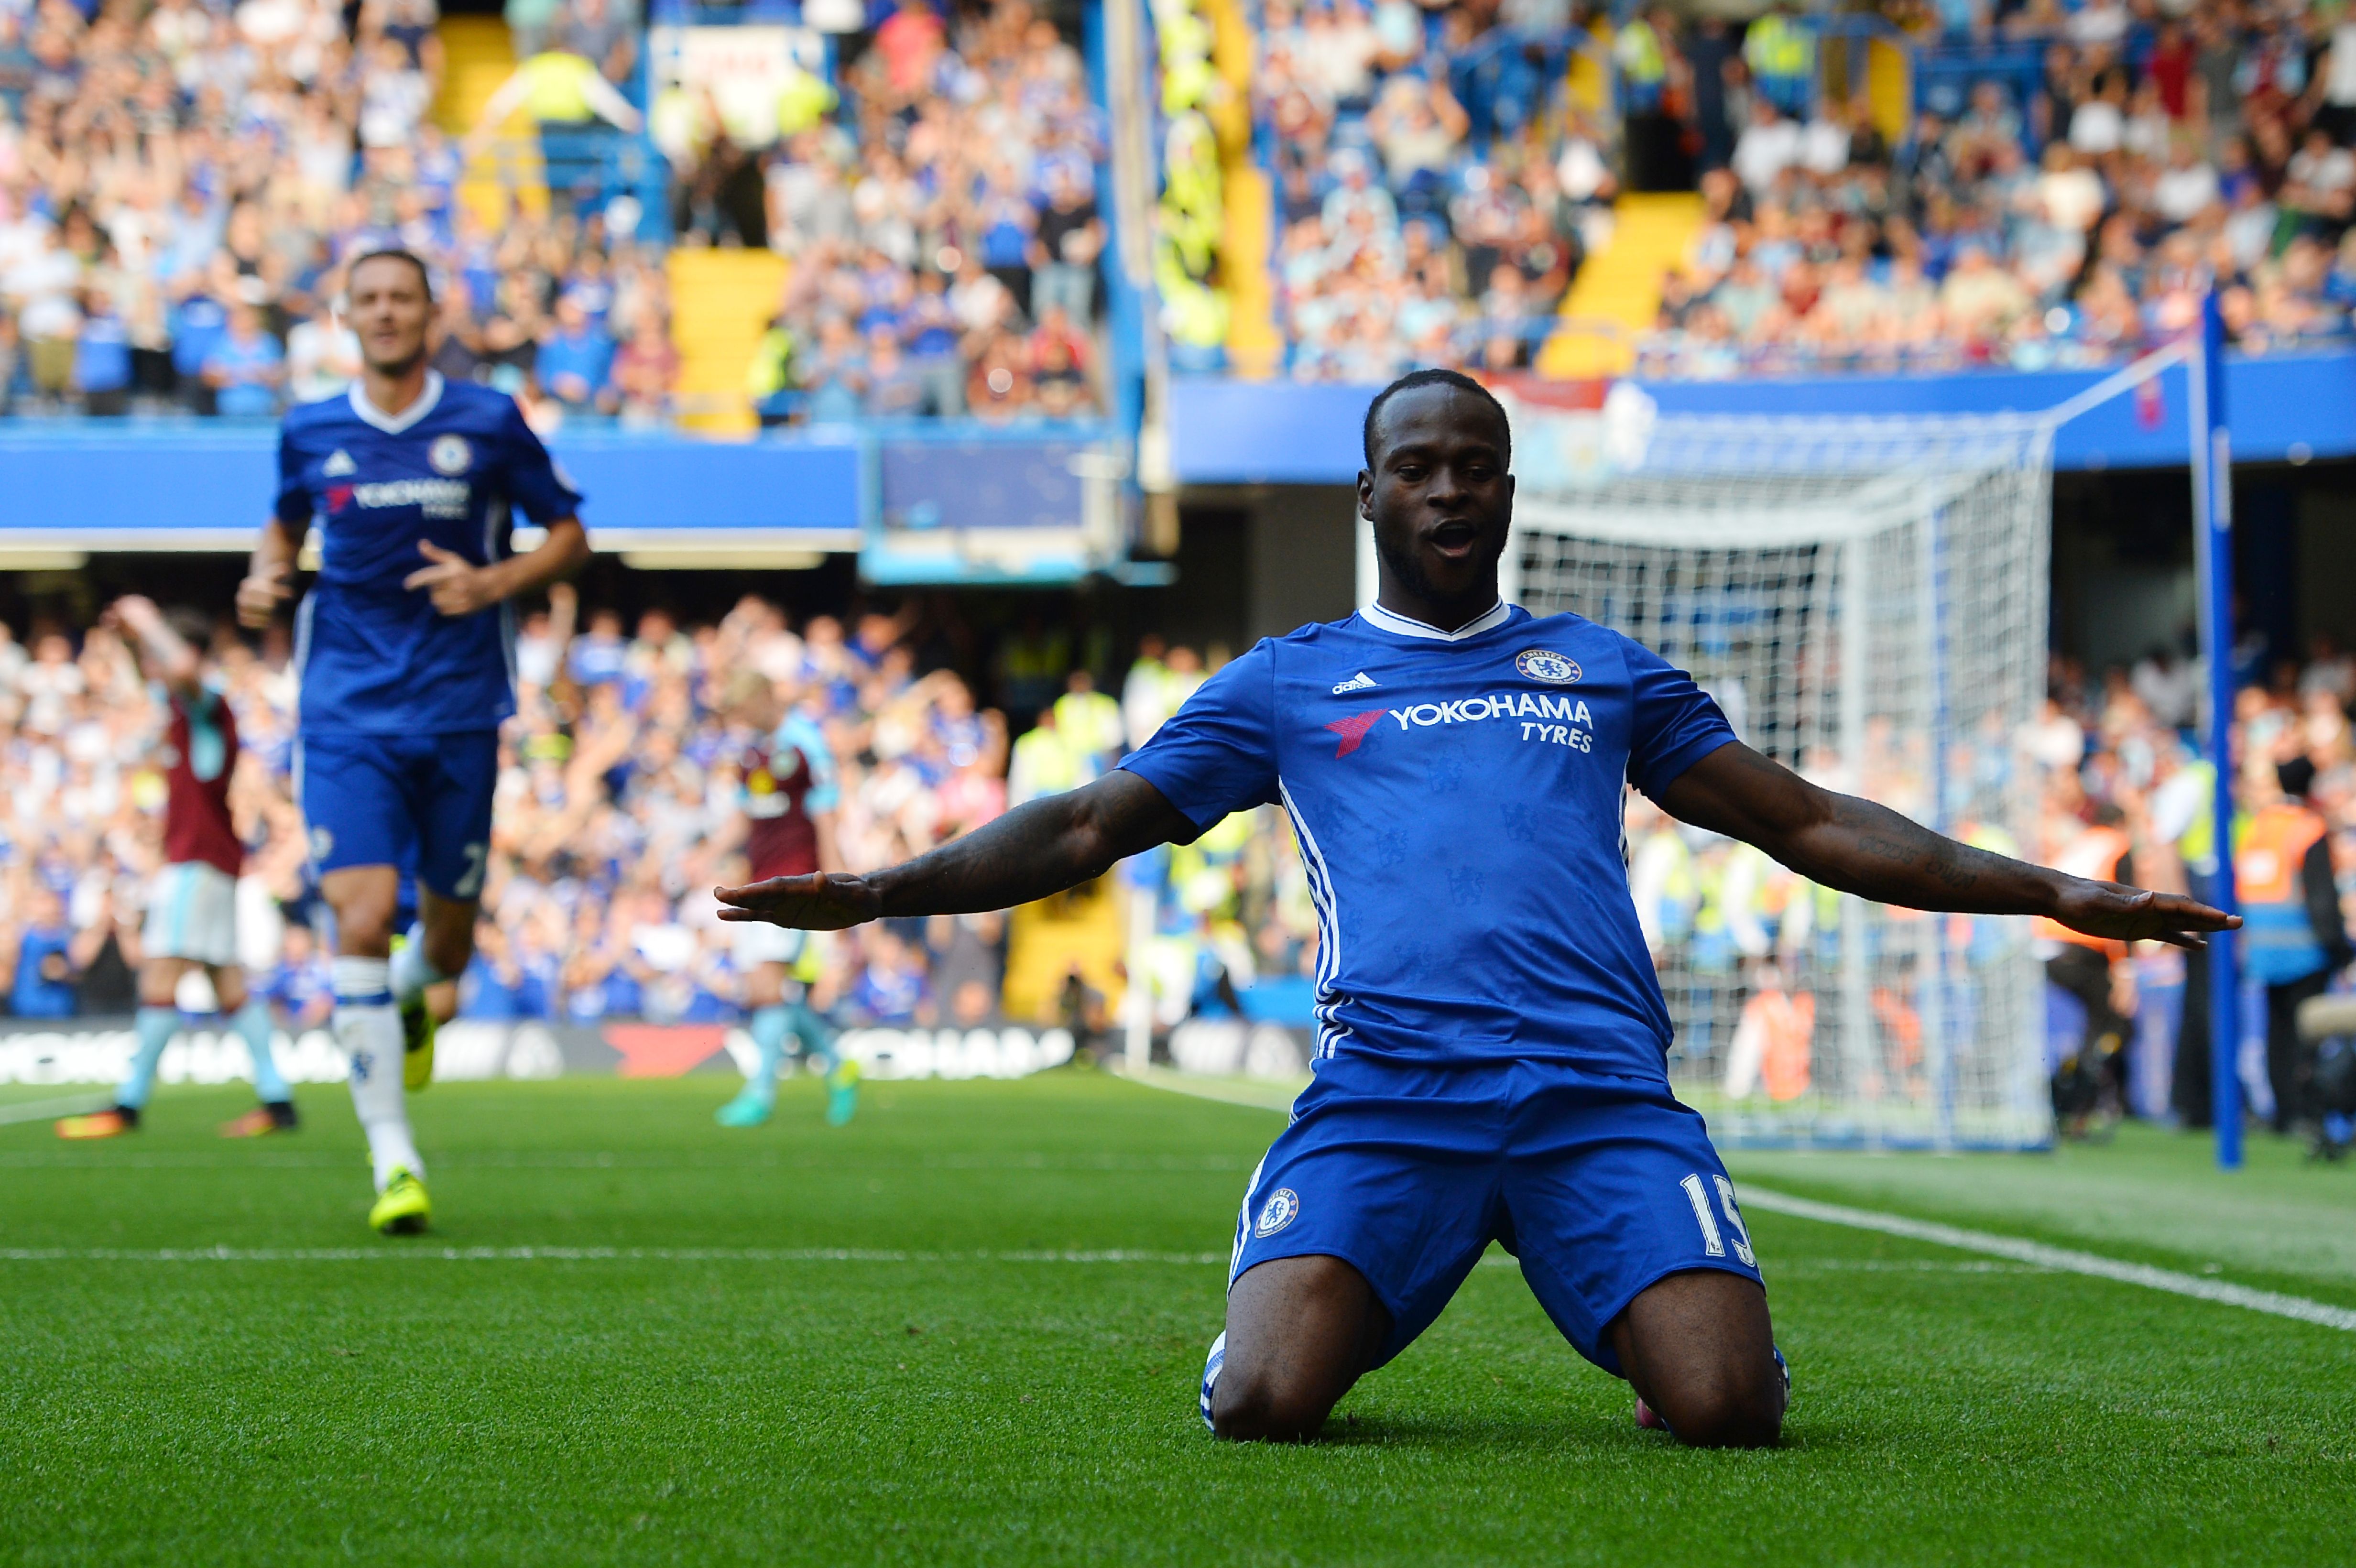 Chelsea's Nigerian midfielder Victor Moses celebrates after scoring during the English Premier League football match between Chelsea and Burnley at Stamford Bridge in London on August 27, 2016. (Photo by Glyn Kirk/AFP/Getty Images)